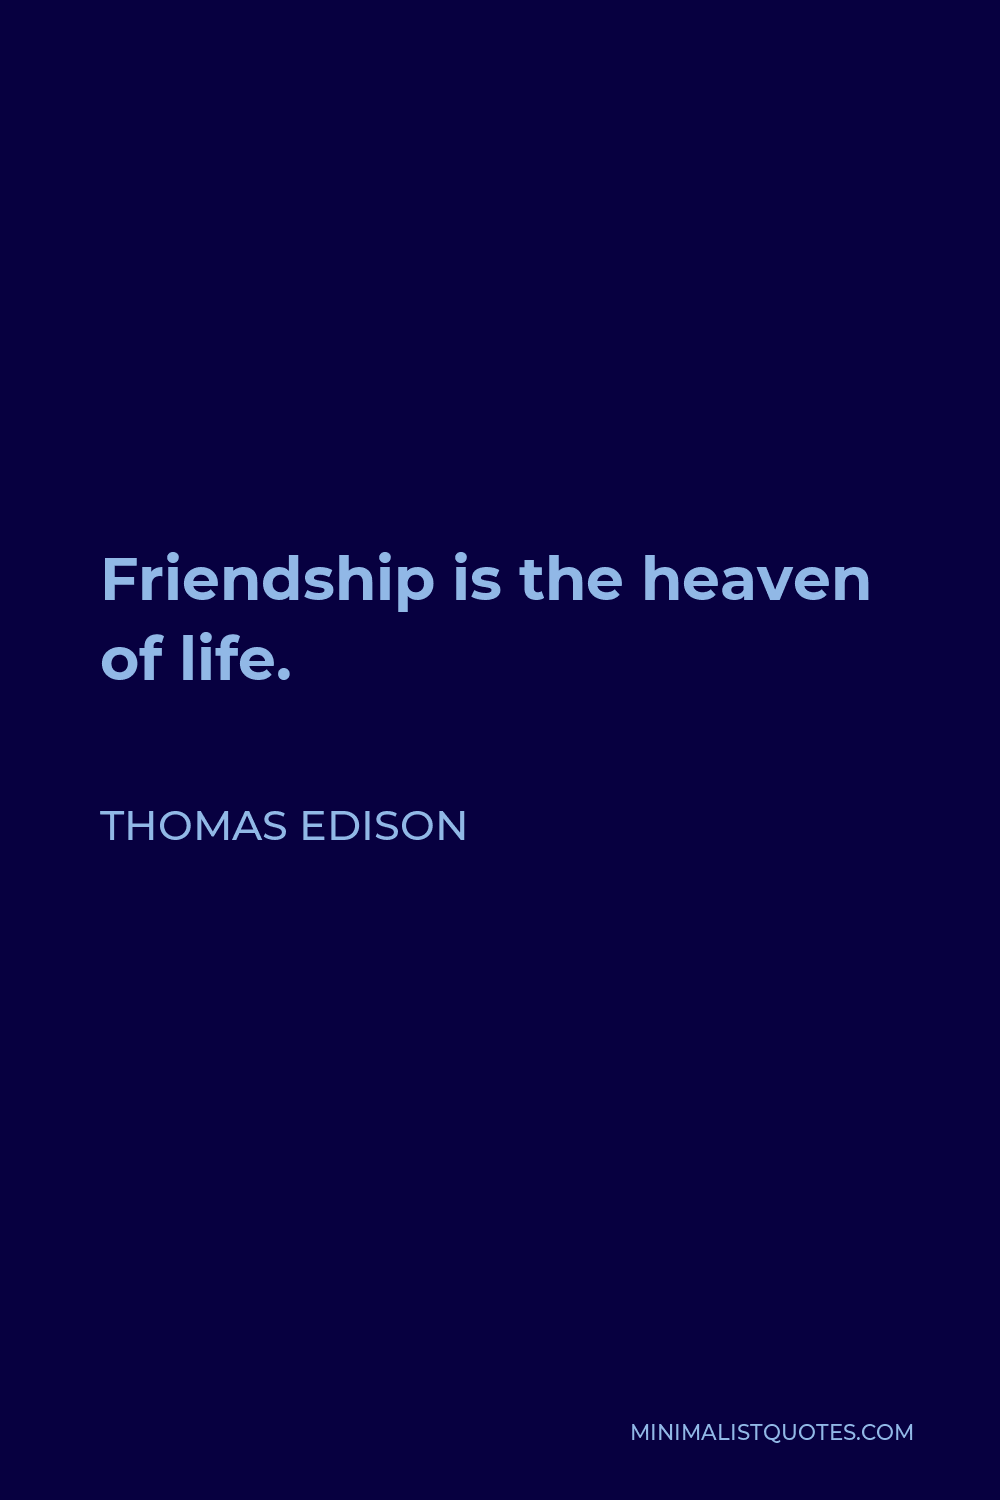 Thomas Edison Quote - Friendship is the heaven of life.